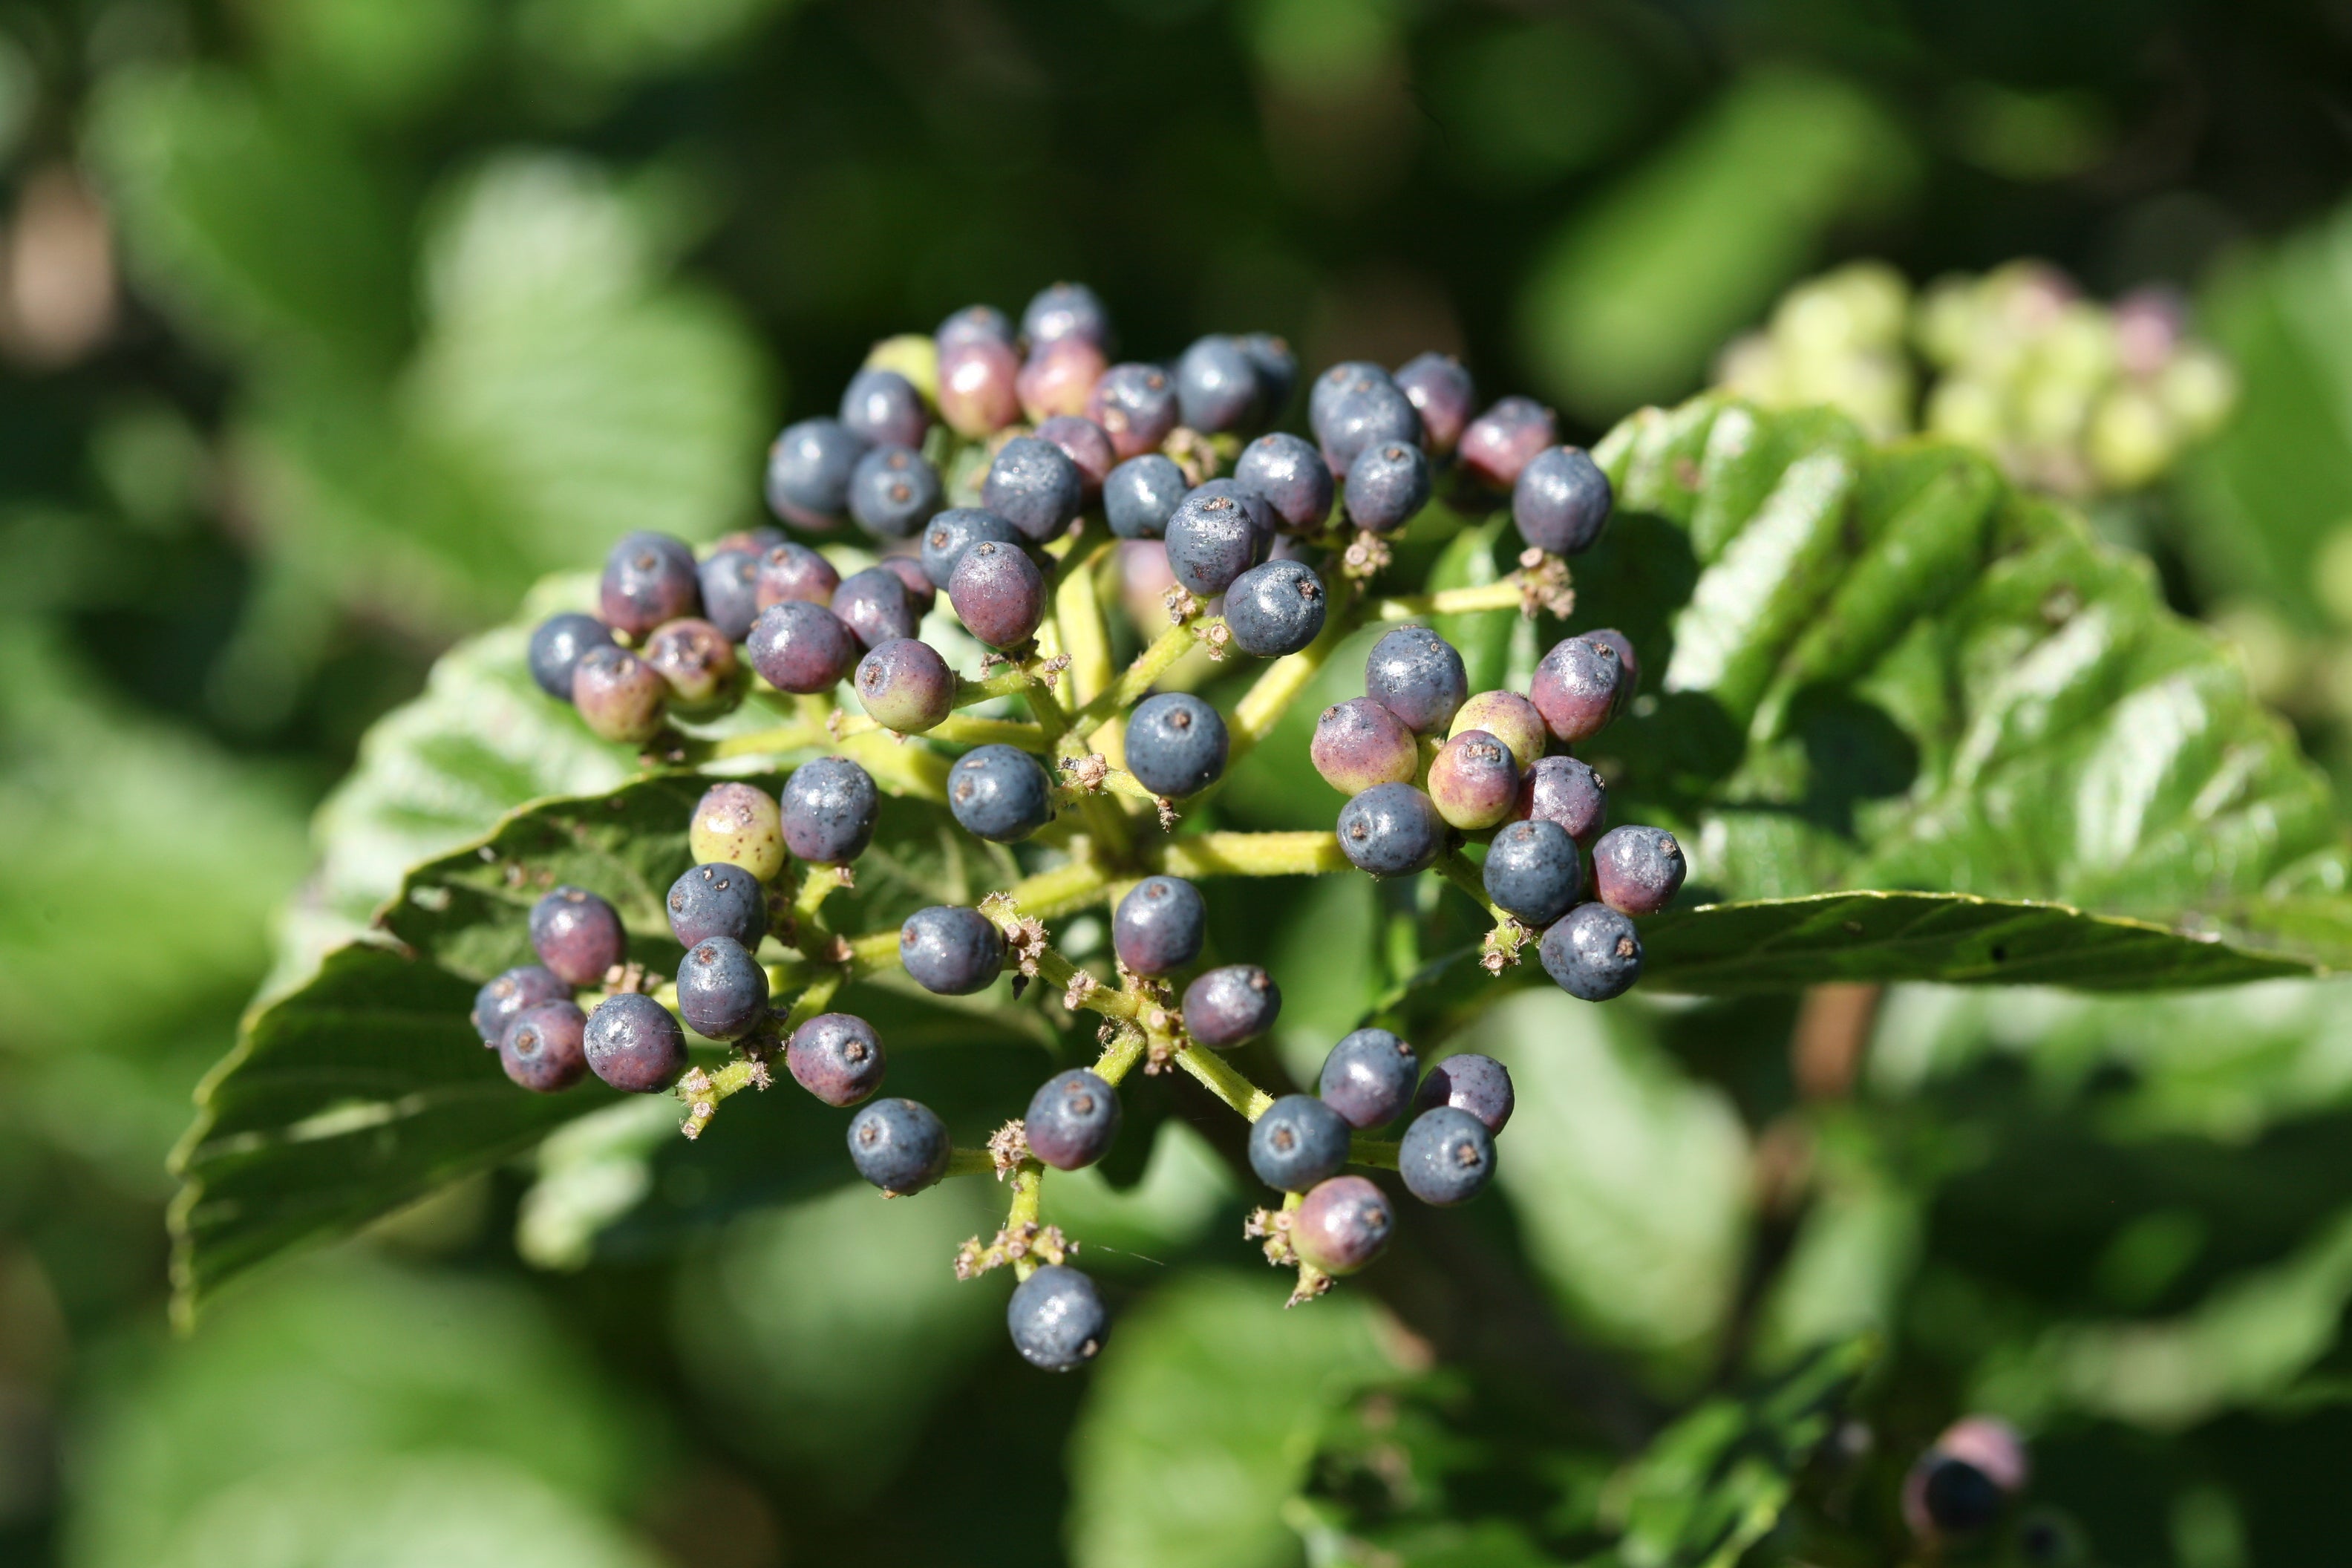 A closeup of the maturing blue fruit on All That Glows viburnum